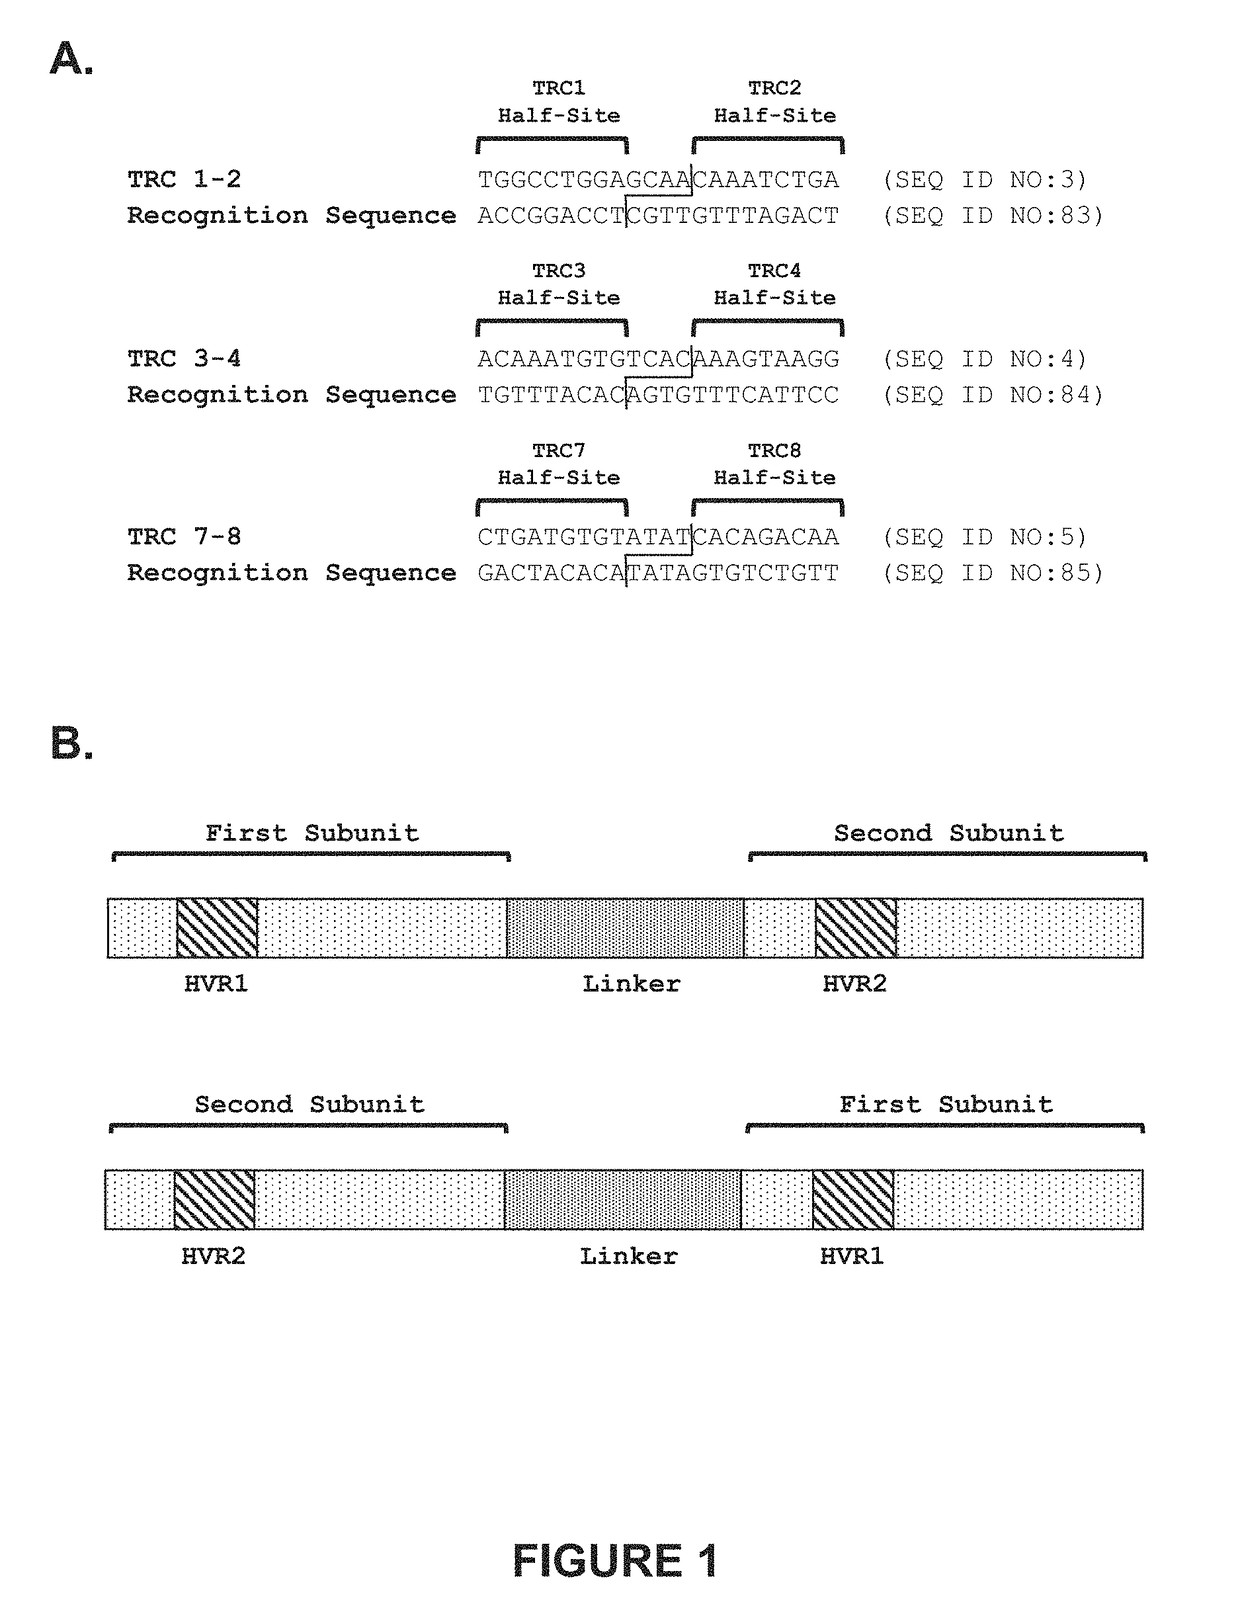 Genetically-modified cells comprising a modified human T cell receptor alpha constant region gene